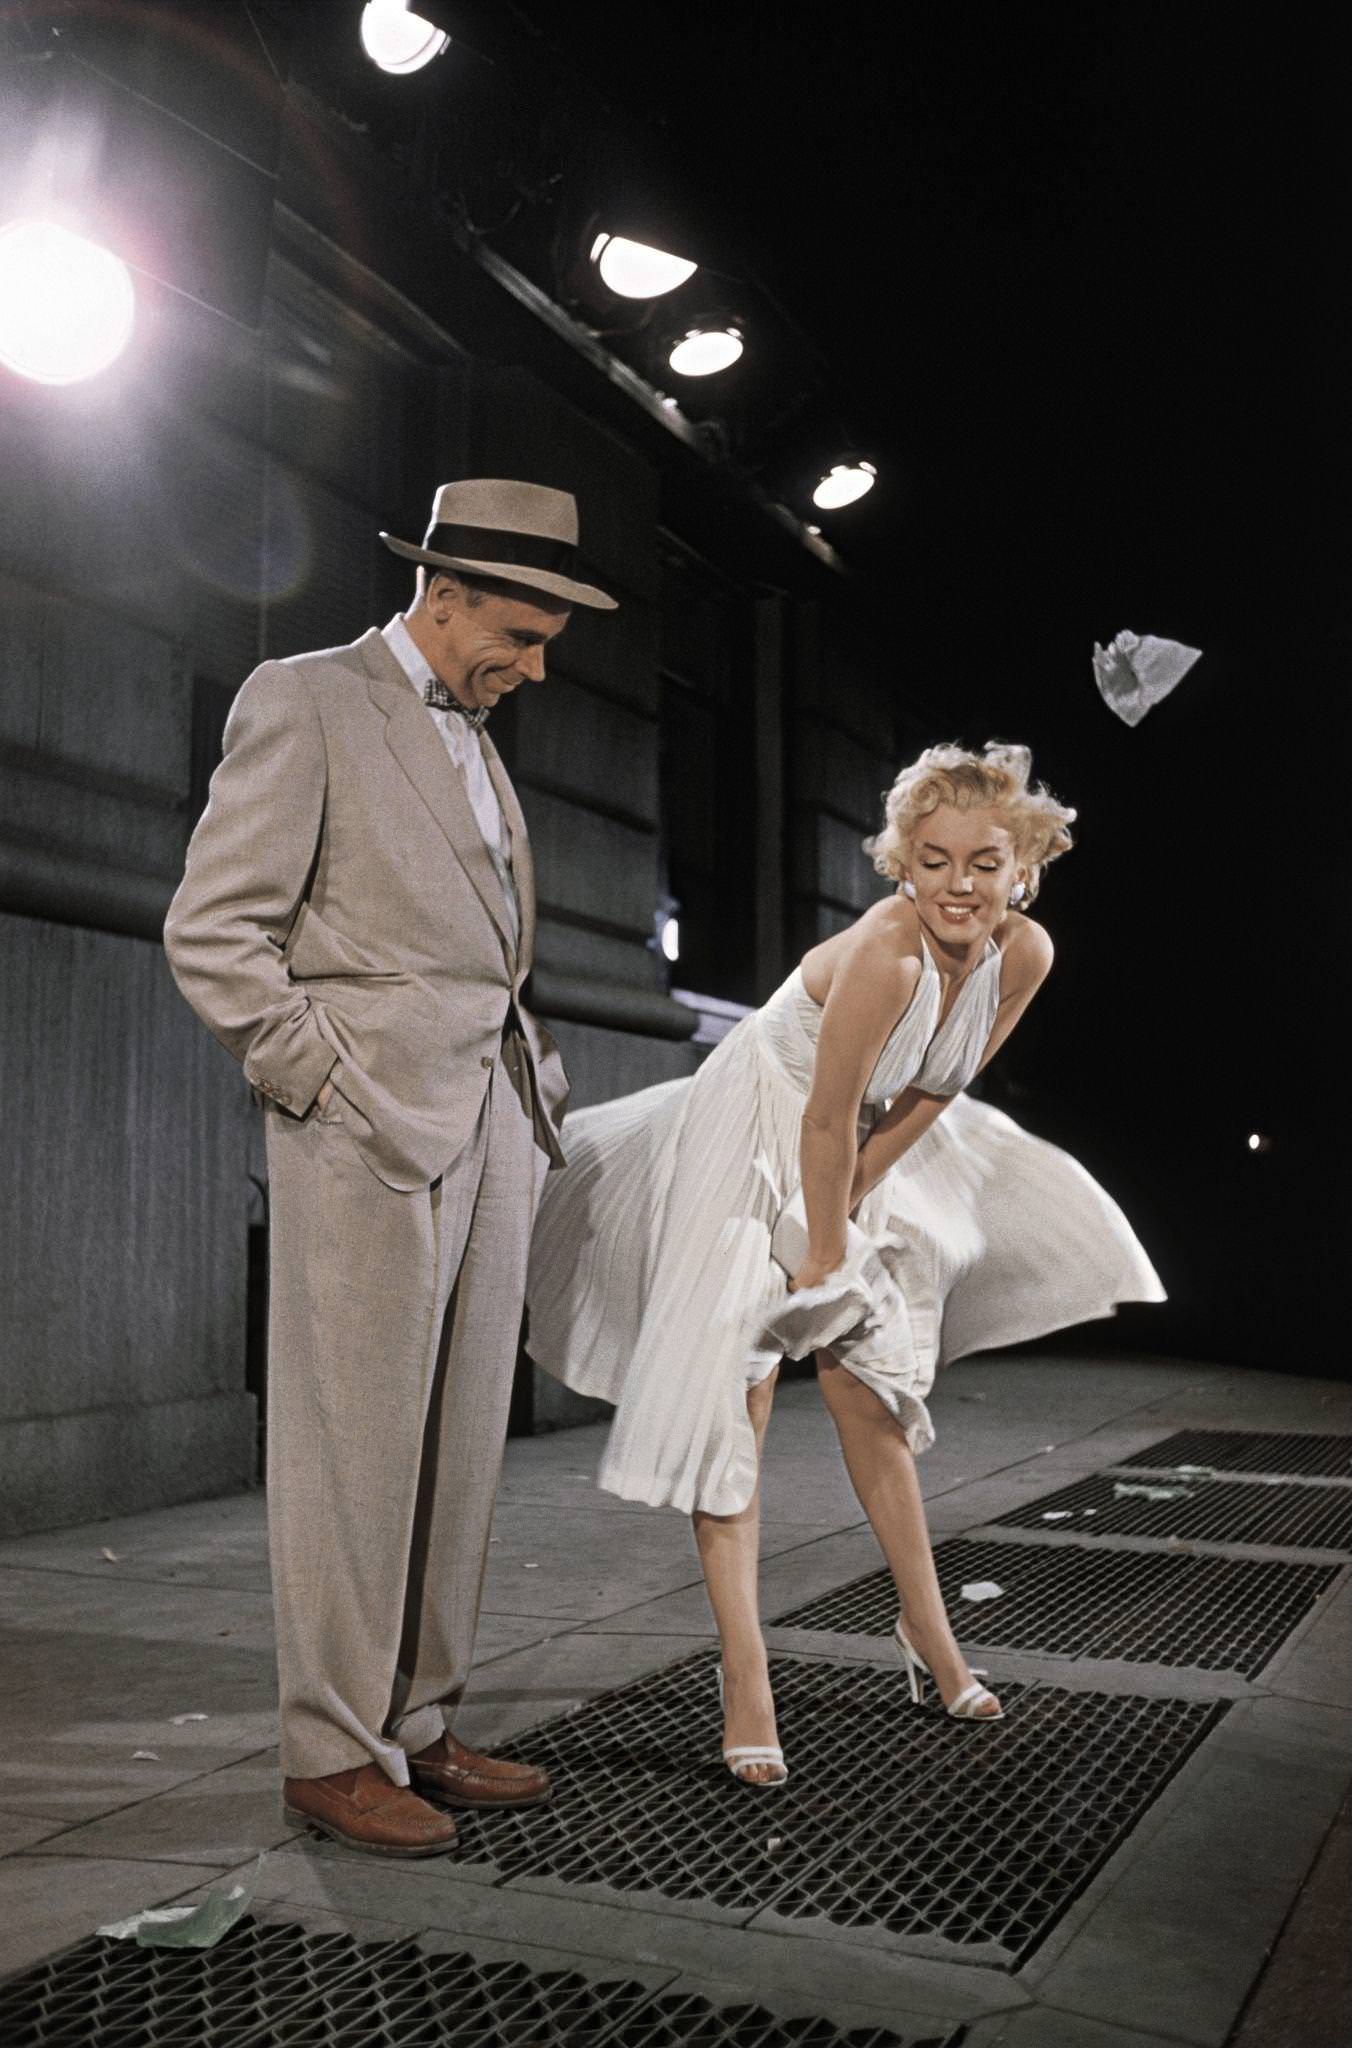 Marilyn Monroe standing over a subway grate with her white dress blowing and co-star Tom Ewell looking on in 1954 during the filming of "The Seven Year Itch"